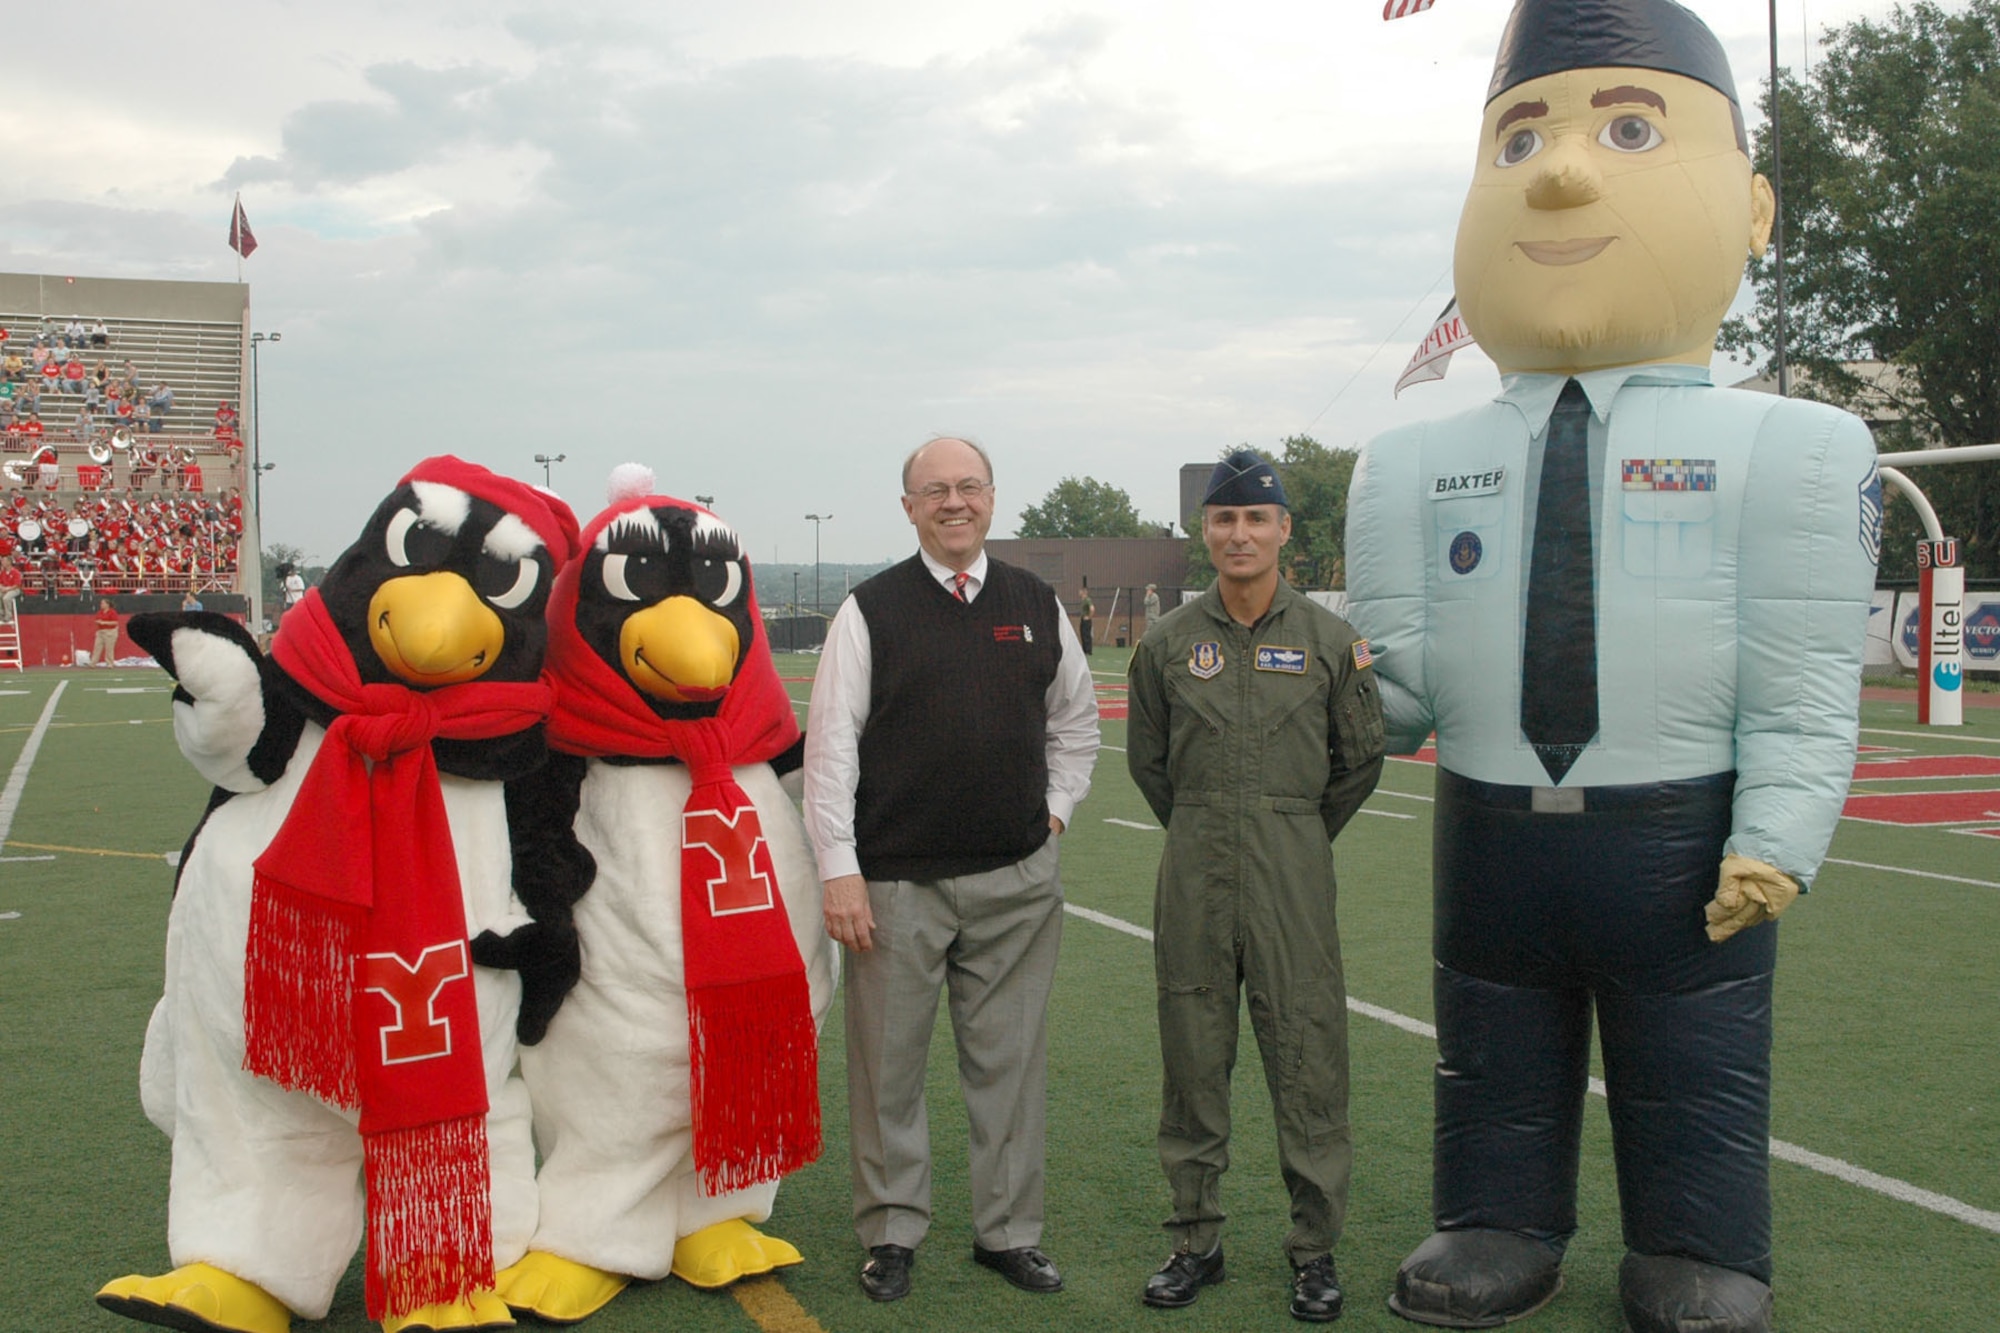 YOUNGSTOWN STATE UNIVERSITY, Ohio — Youngstown State University mascots Pete and Penny Penguin, YSU President Dr. David Sweet, Air Force Reserve 910th Airlift Wing commander Col. Karl McGregor and Air Force Reserve mascot Airman Andy stand on Beede Field at YSU's Stambuagh Stadium just prior to Colonel McGregor presenting his wing commander's coin to Dr. Sweet as part of the celebration of the U.S. Air Force's 60th birthday during the YSU football team's home opener. 370 Airmen, family members and friends from the 910th, based at Youngstown Air Reserve Station, attended a pre-game tailgate lot celebration and the YSU game as part of the USAF's 60th brithday bash. U.S. Air Force photo/ Tech. Sgt. Bob Barko Jr. 